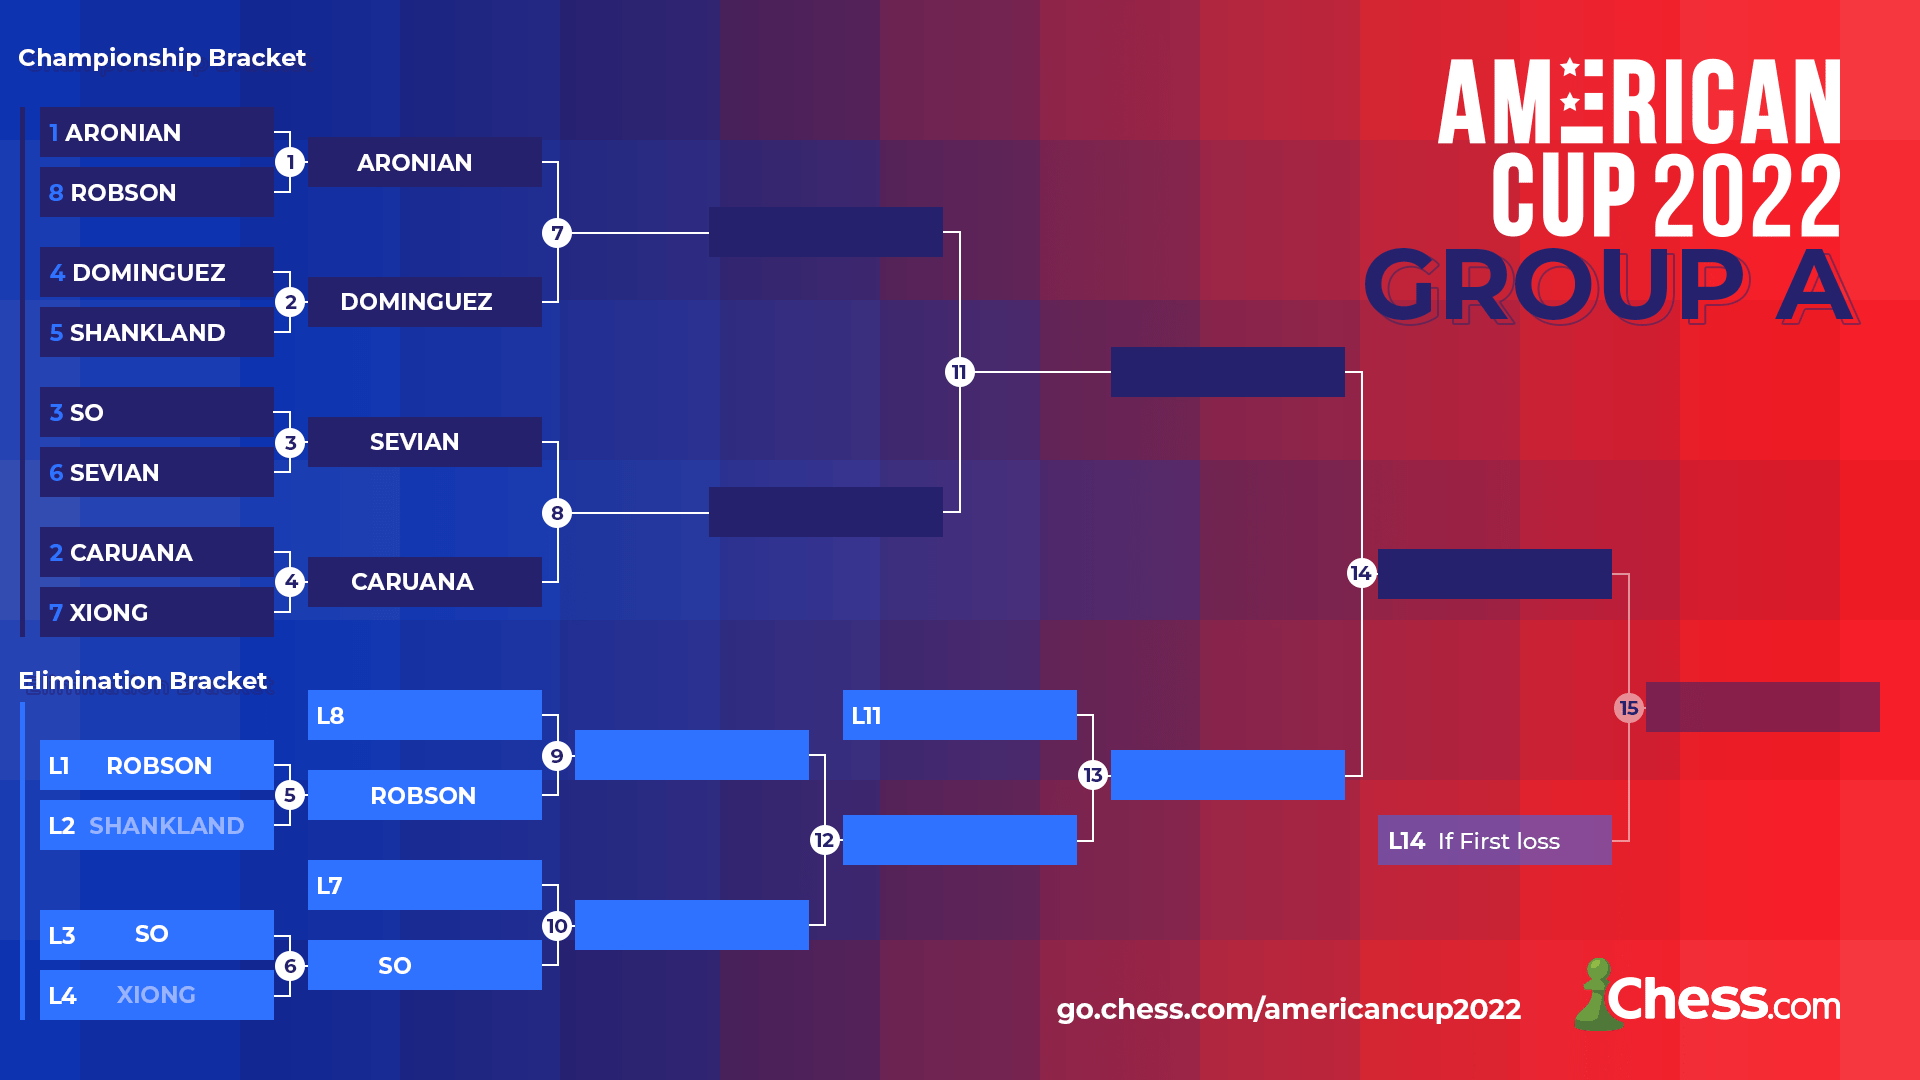 The American Cup 2022 results